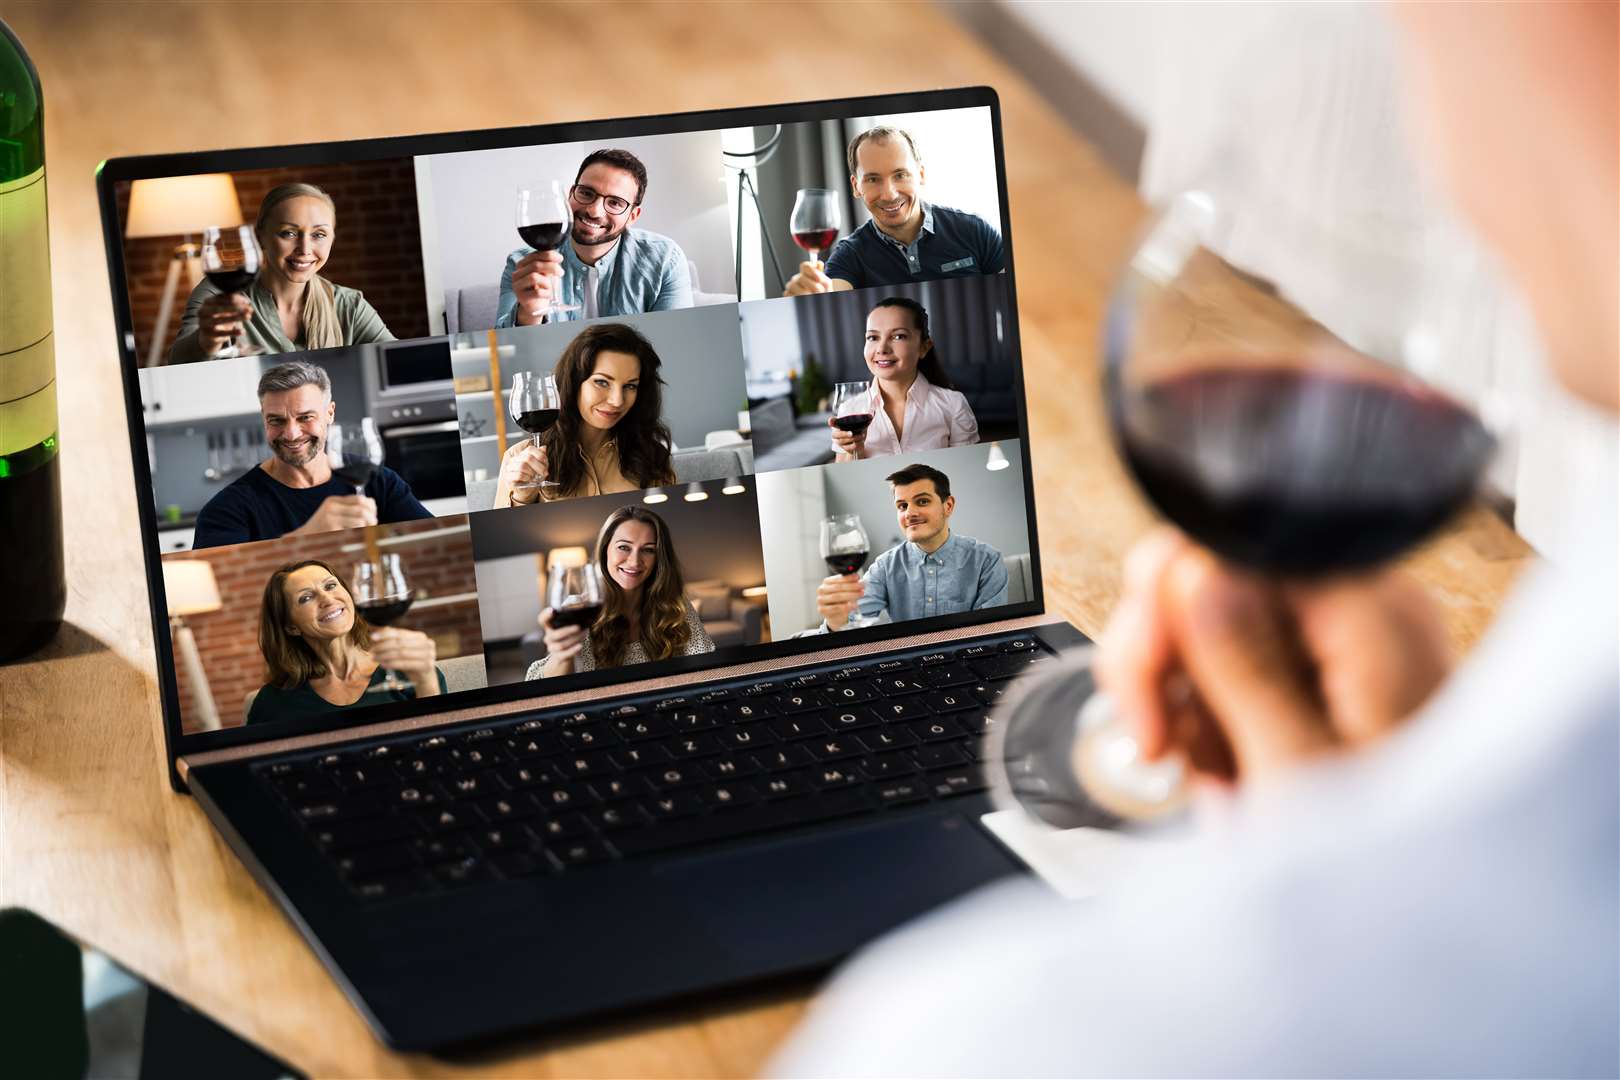 Virtual wine tastings have become the best way to interact over a glass or two.